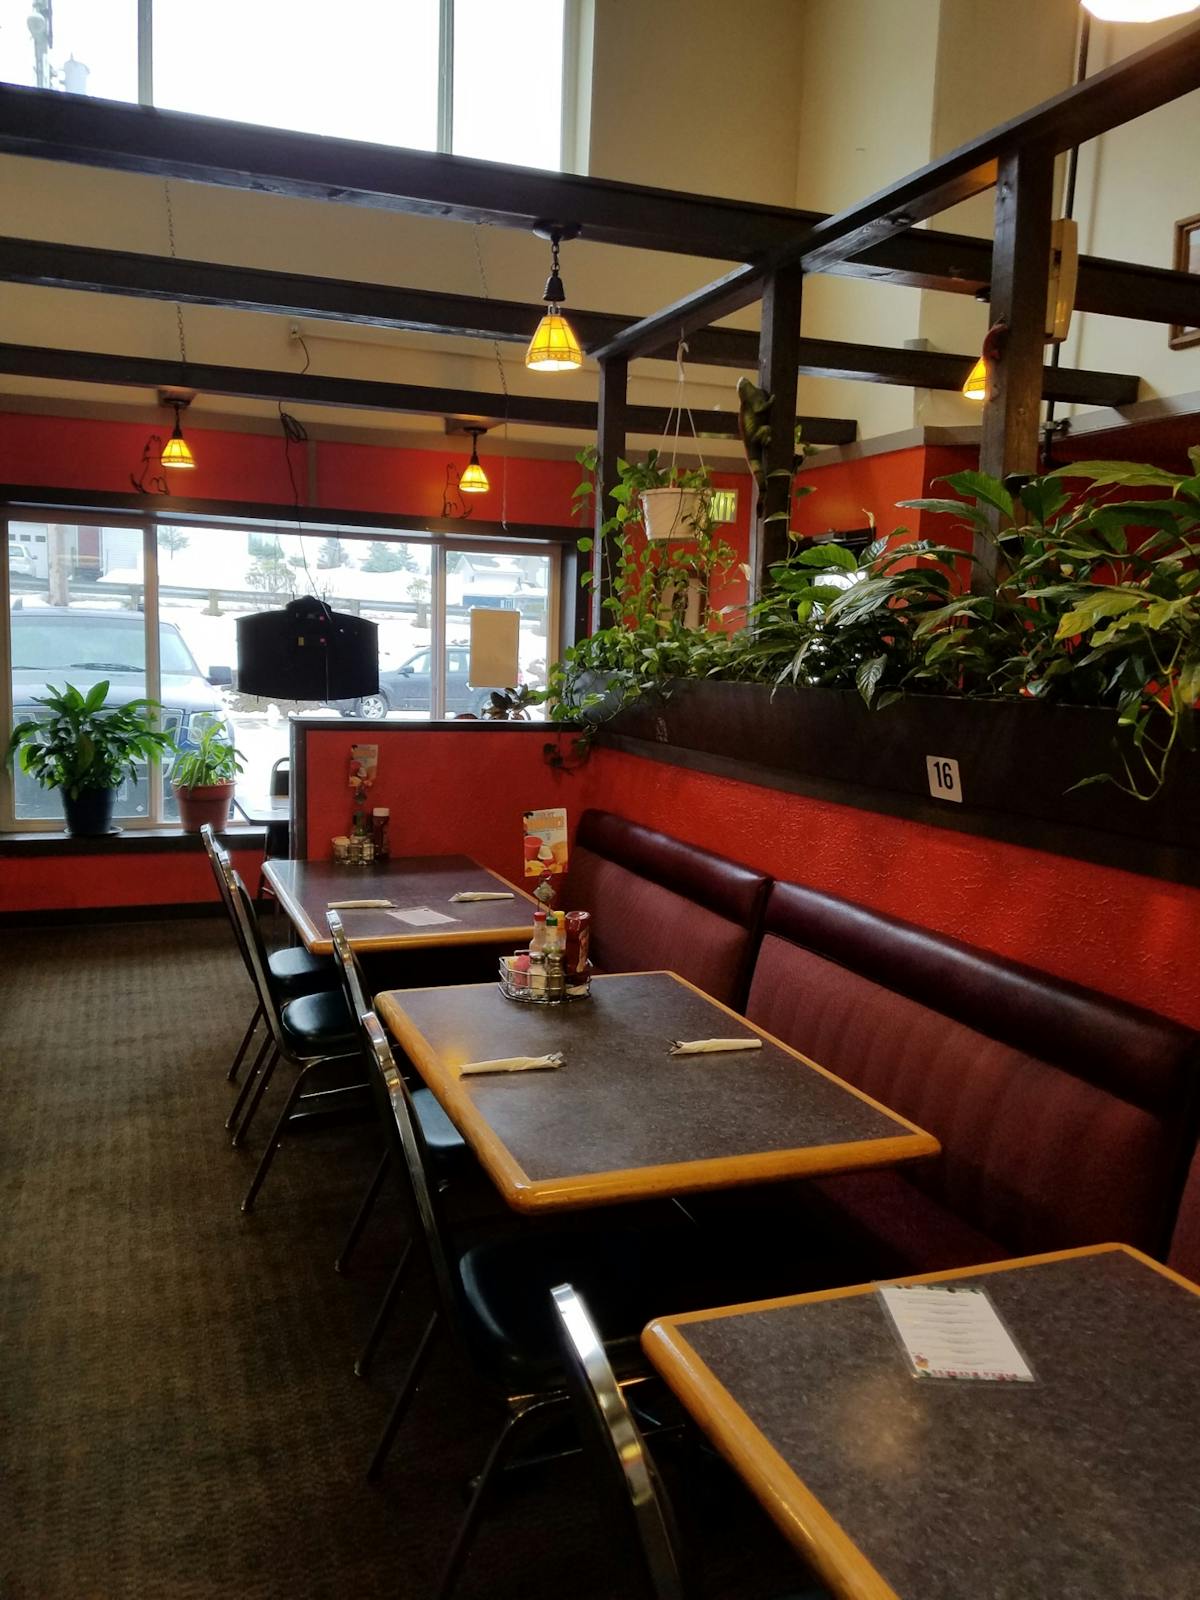 An interior of Pizza Express with tables and booth